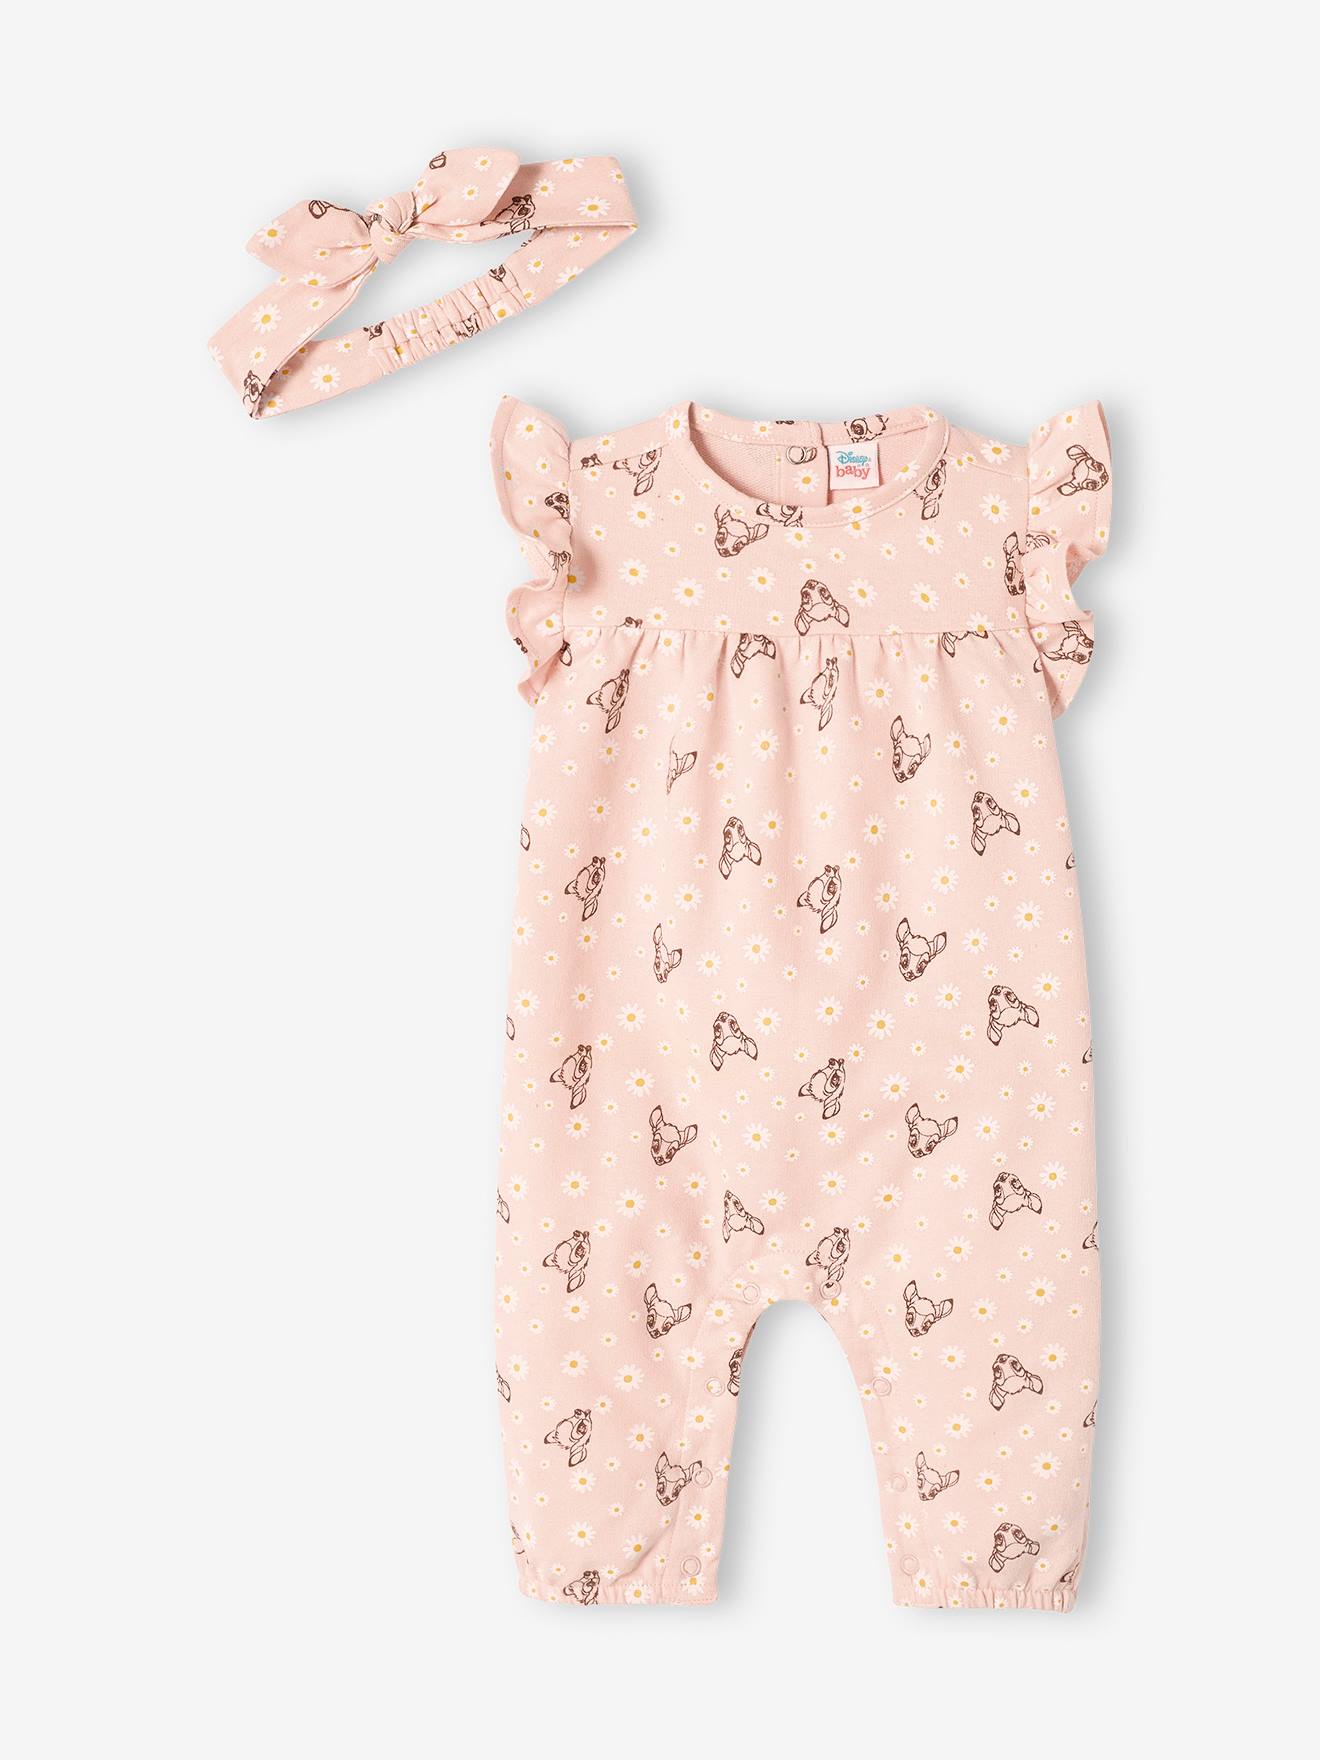 2-Item Combo: Jumpsuit + Hairband for Girls, Bambi(r) by Disney old rose